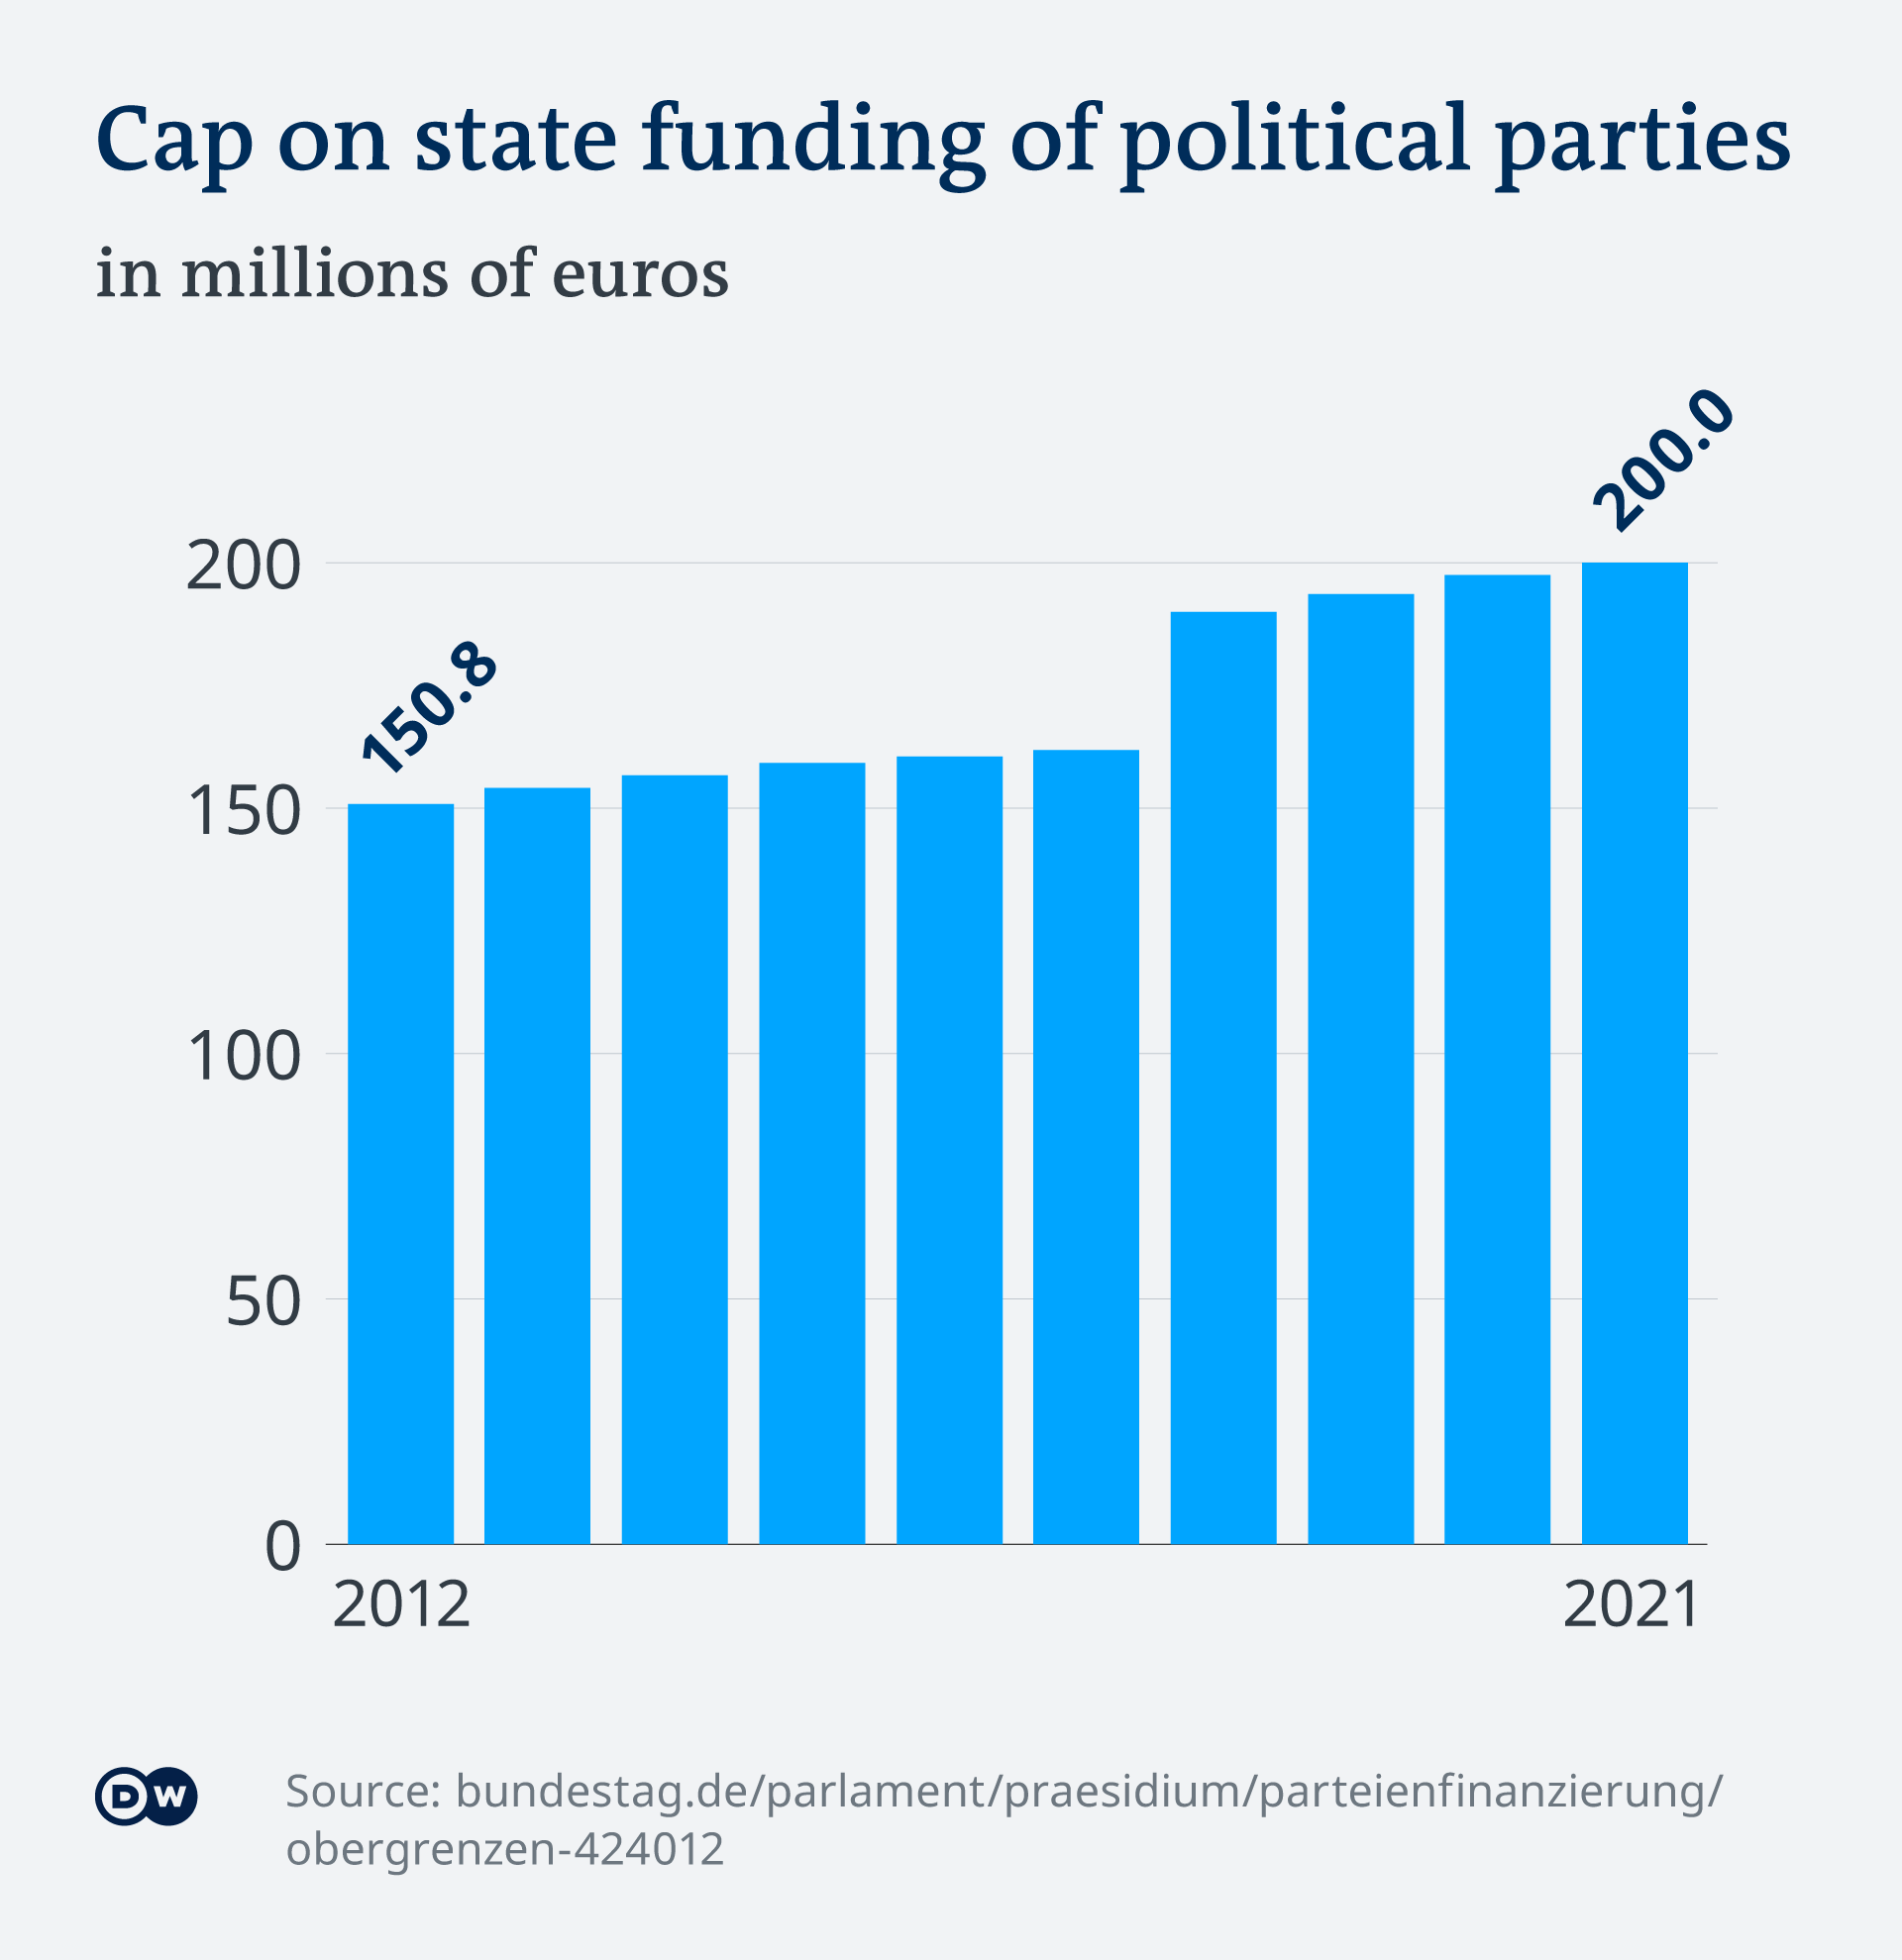 DW Infographic: Caps on state funding of political parties